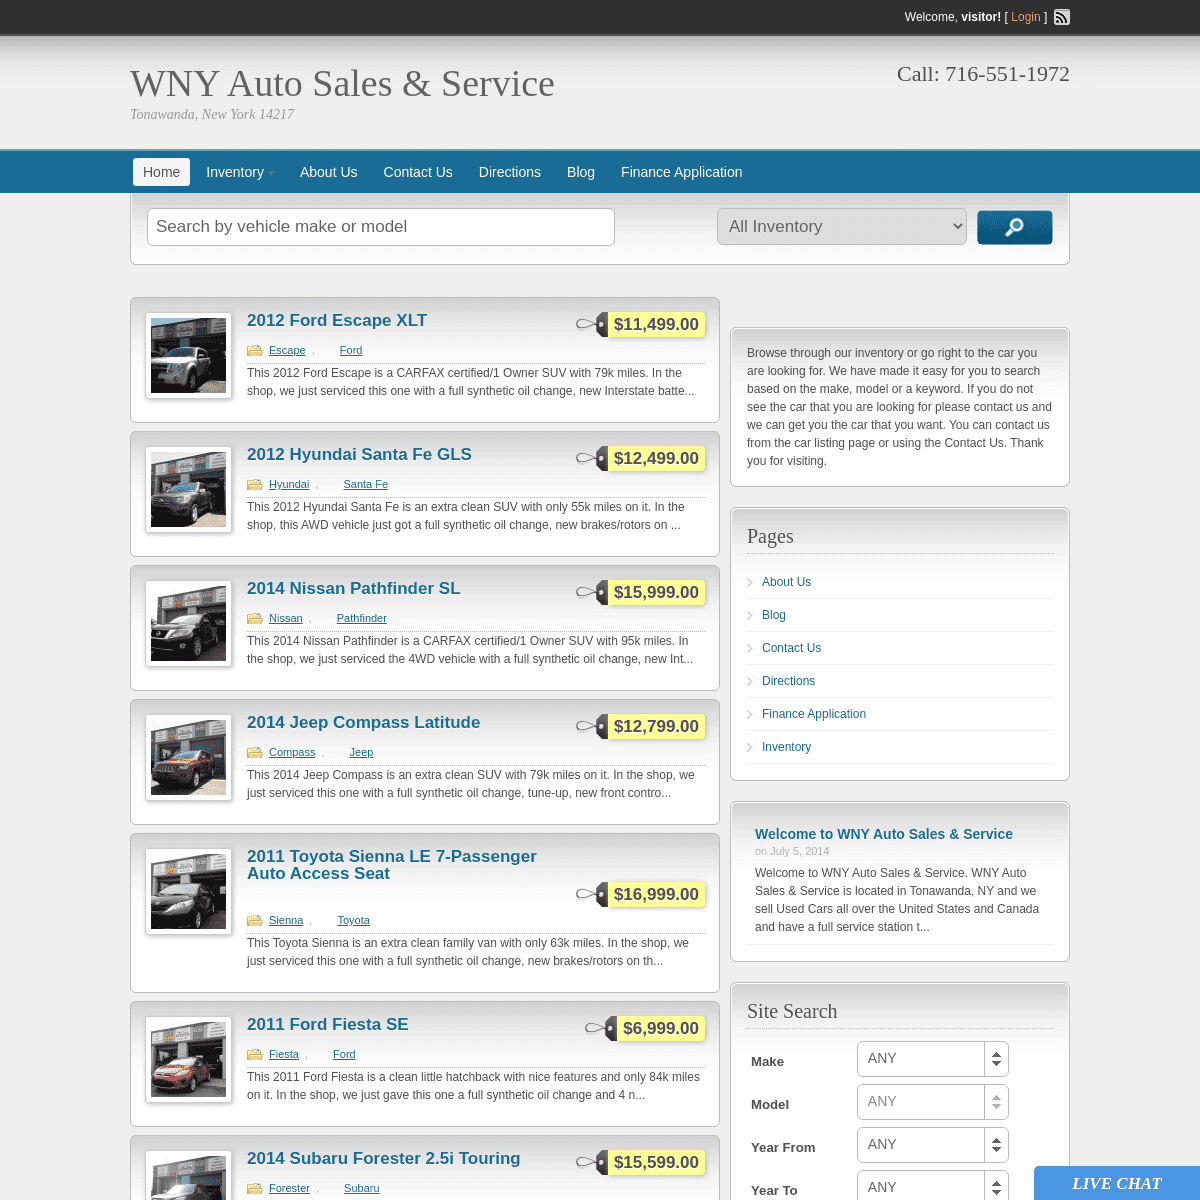 A complete backup of https://wnyautosales.com